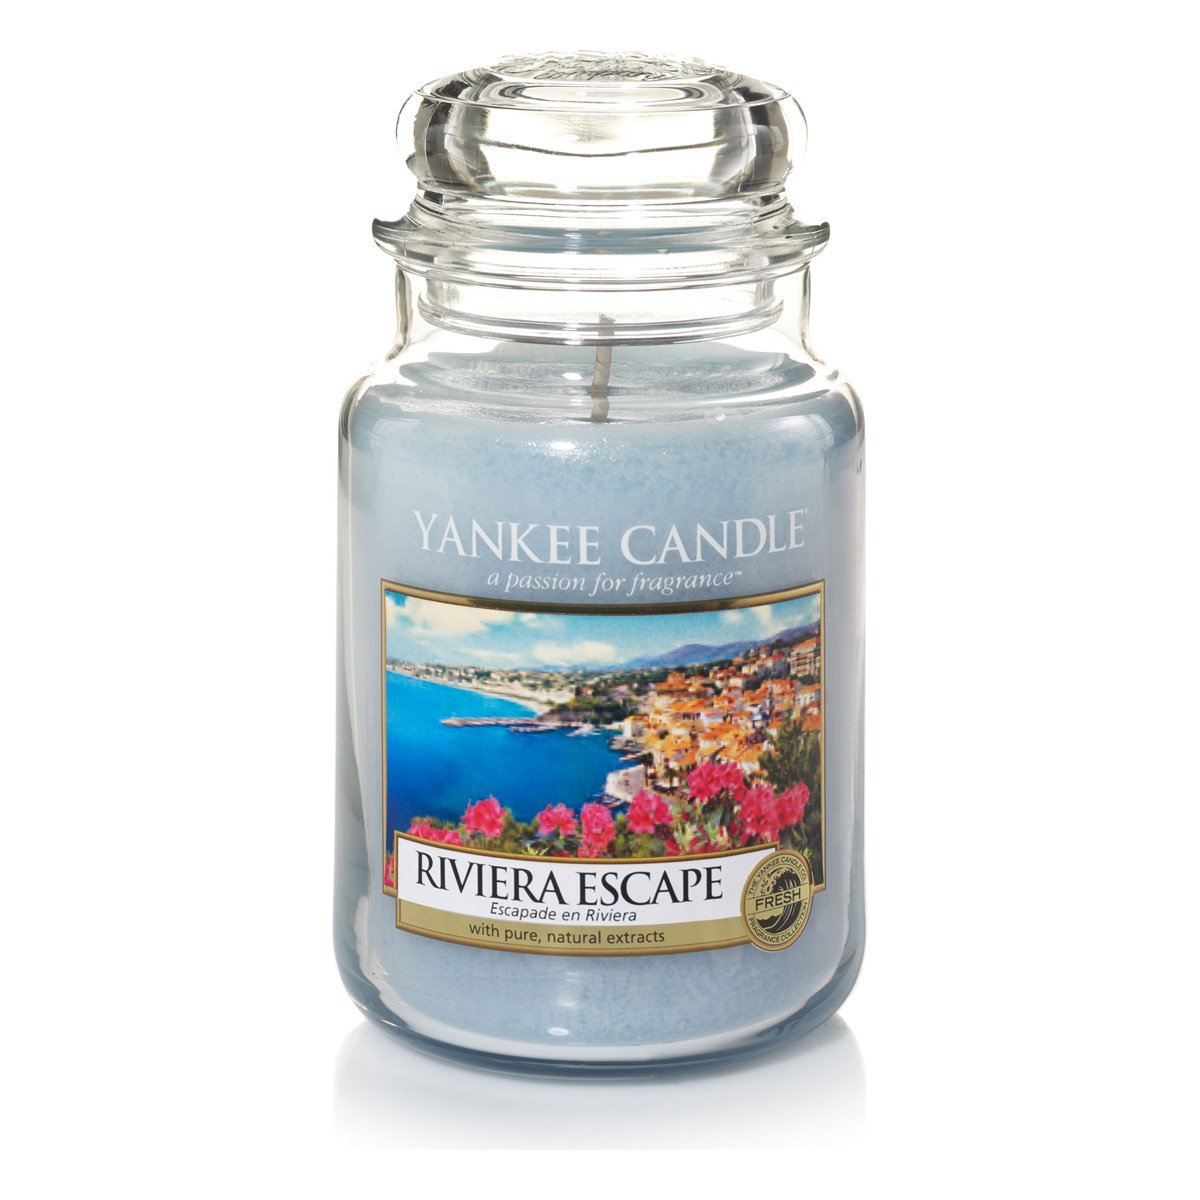 Win a Surprise Large Jar Yankee Candle!